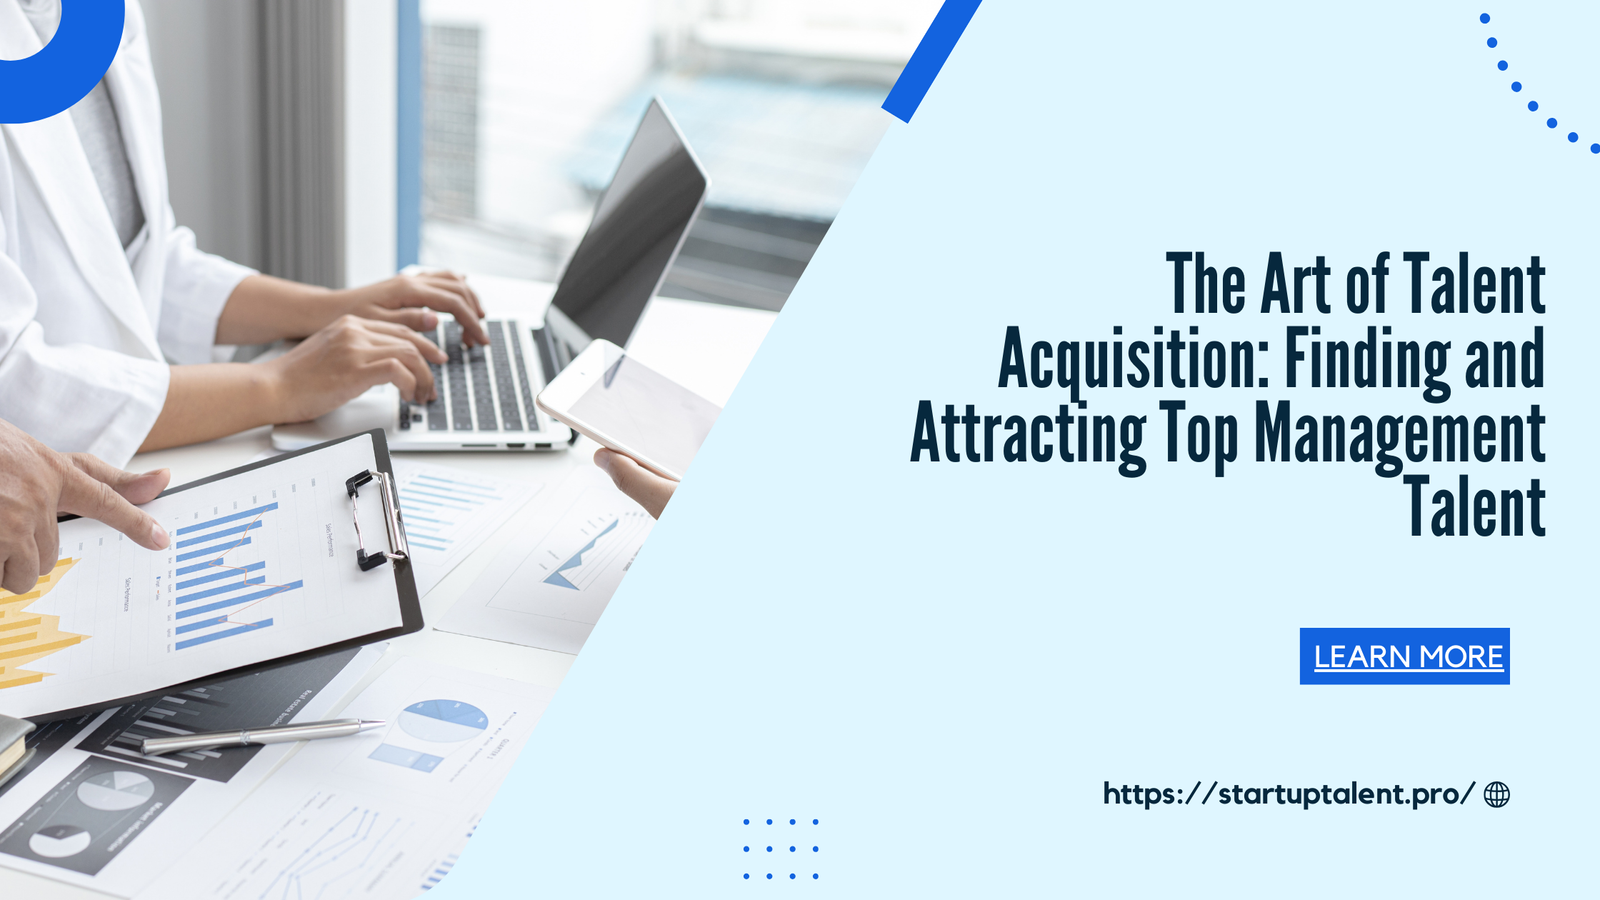 The-Art-of-Talent-Acquisition-Finding-and-Attracting-Top-Management-Talent